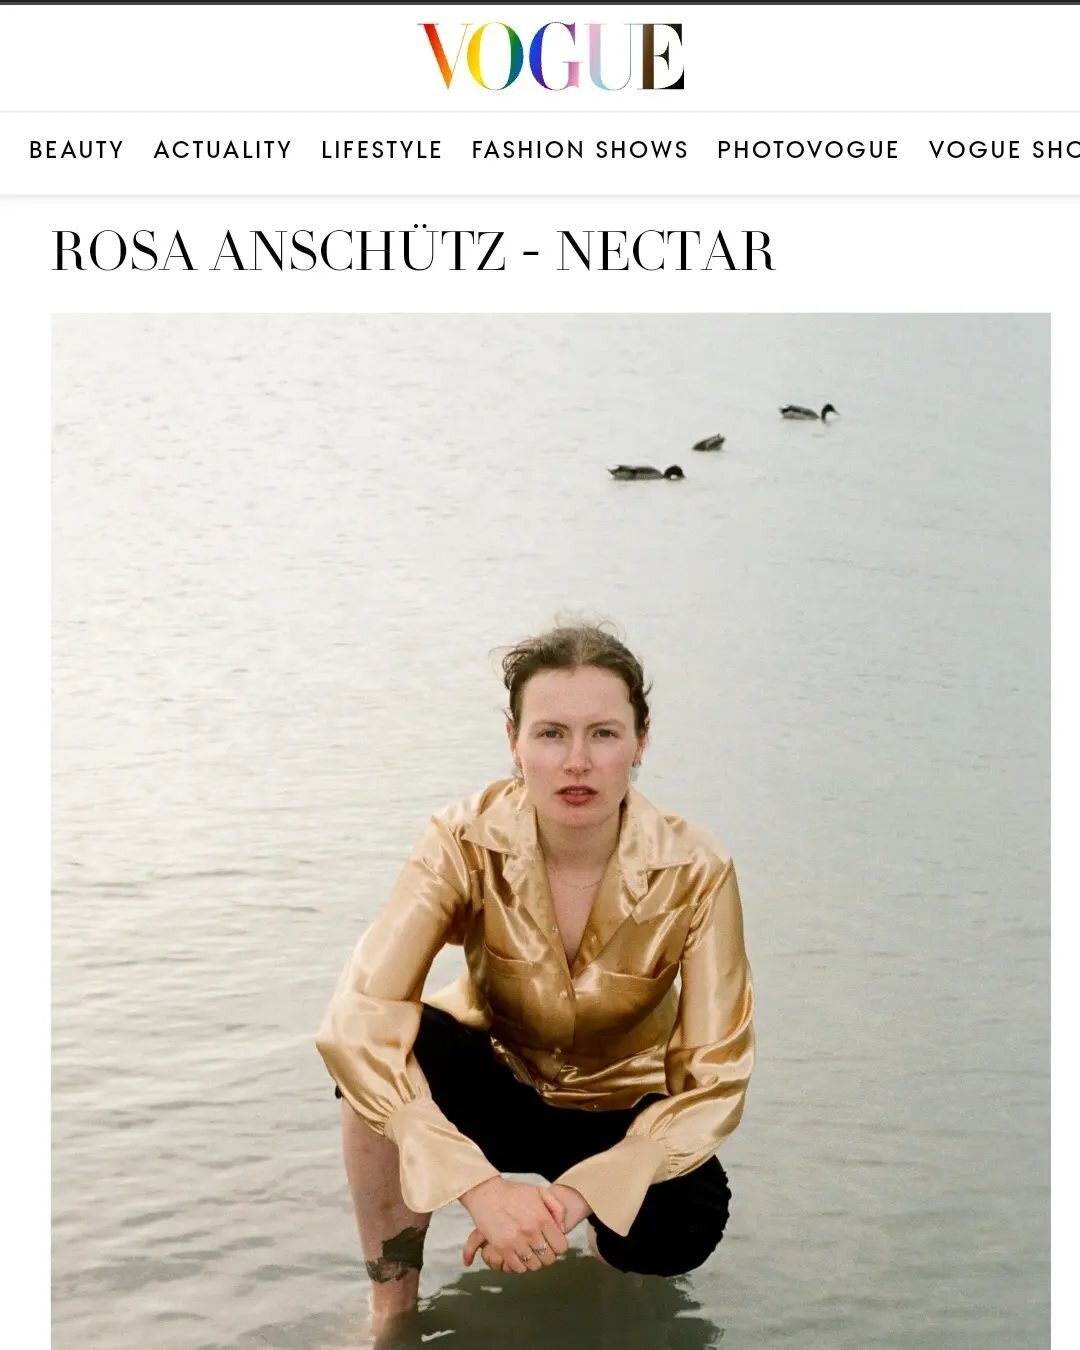 🪄🪄 Rosa Ansch&uuml;tz @rosaanschuetz Interview with VOGUE ITALIA 🇮🇹 with her new track &quot;Nectar&quot; &amp; music video ✨👌🏻

(published in Italian) https://www.vogue.it/news/article/musica-estate-2022-singoli-nuovi-album-da-ascoltare